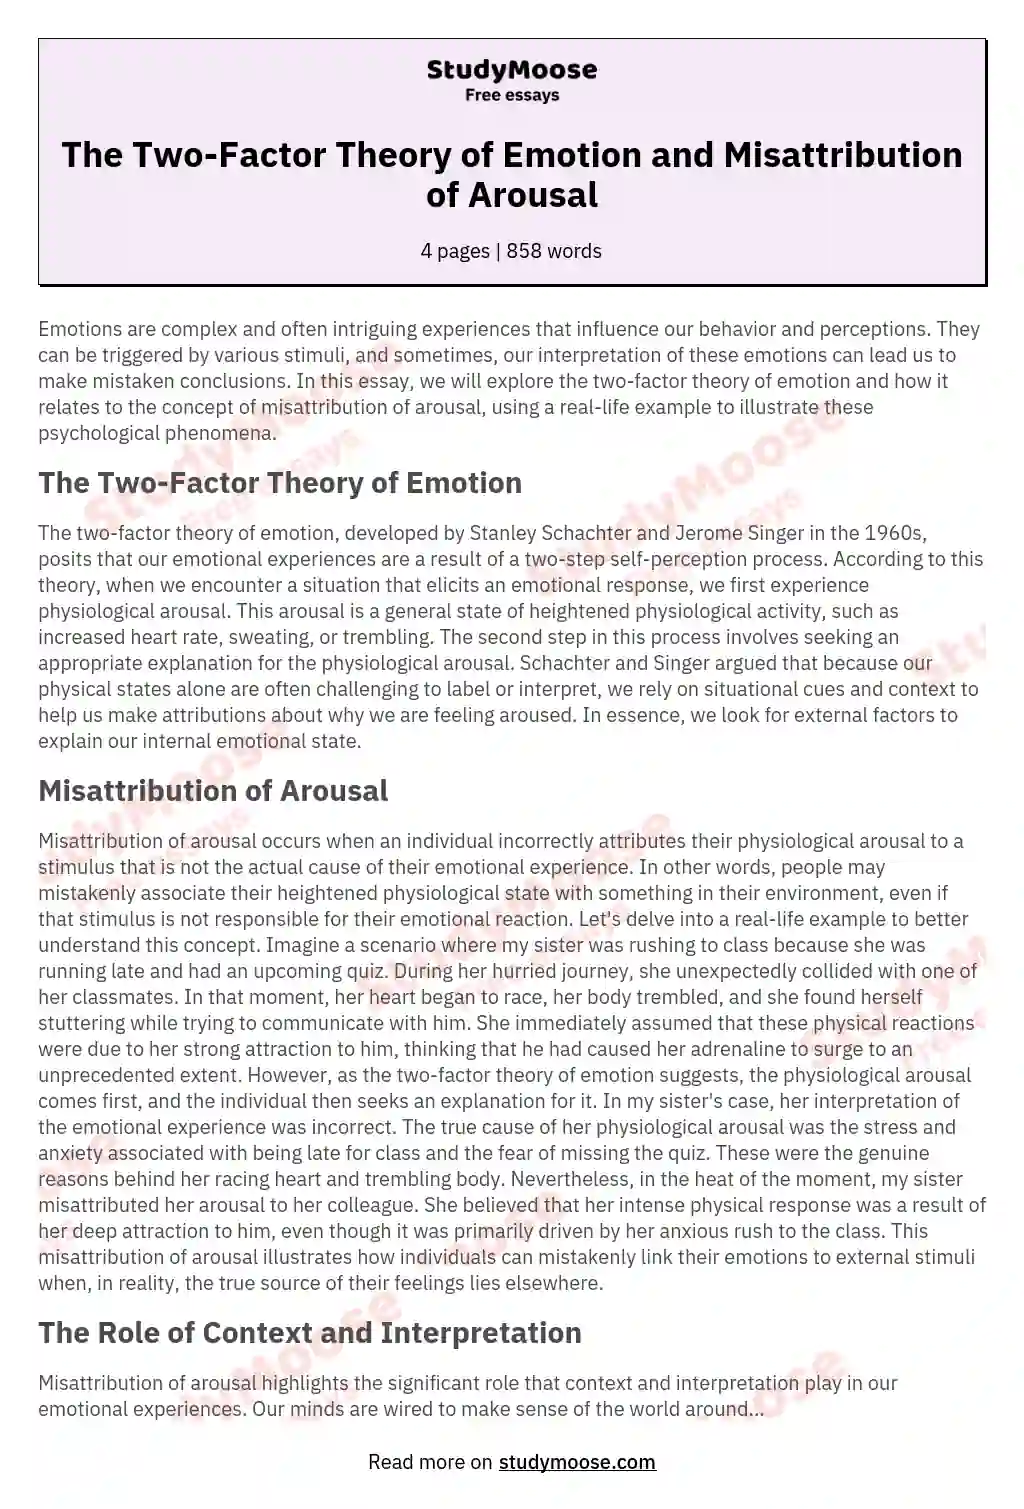 The Two-Factor Theory of Emotion and Misattribution of Arousal essay